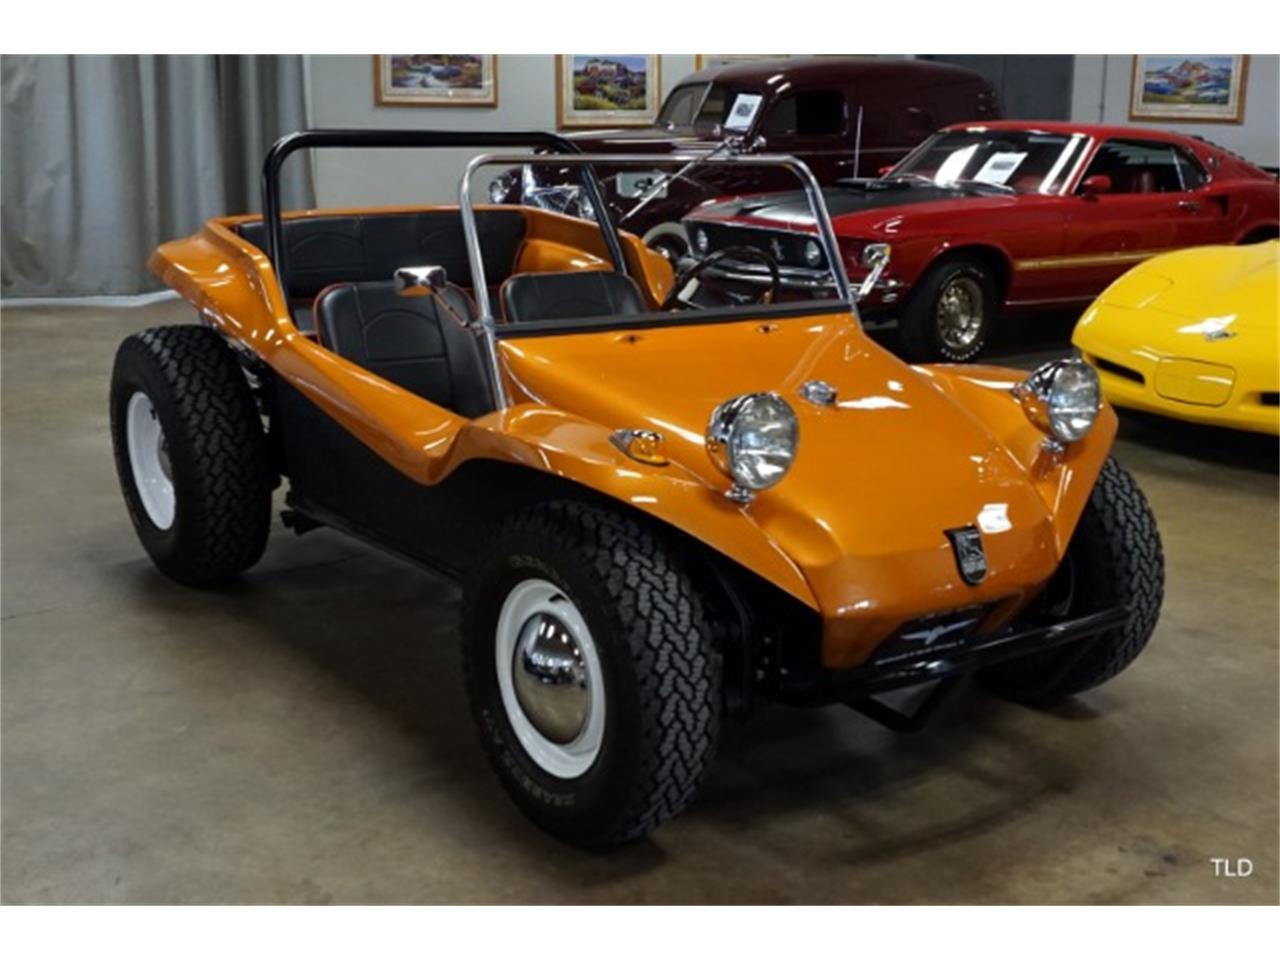 off road buggy for sale